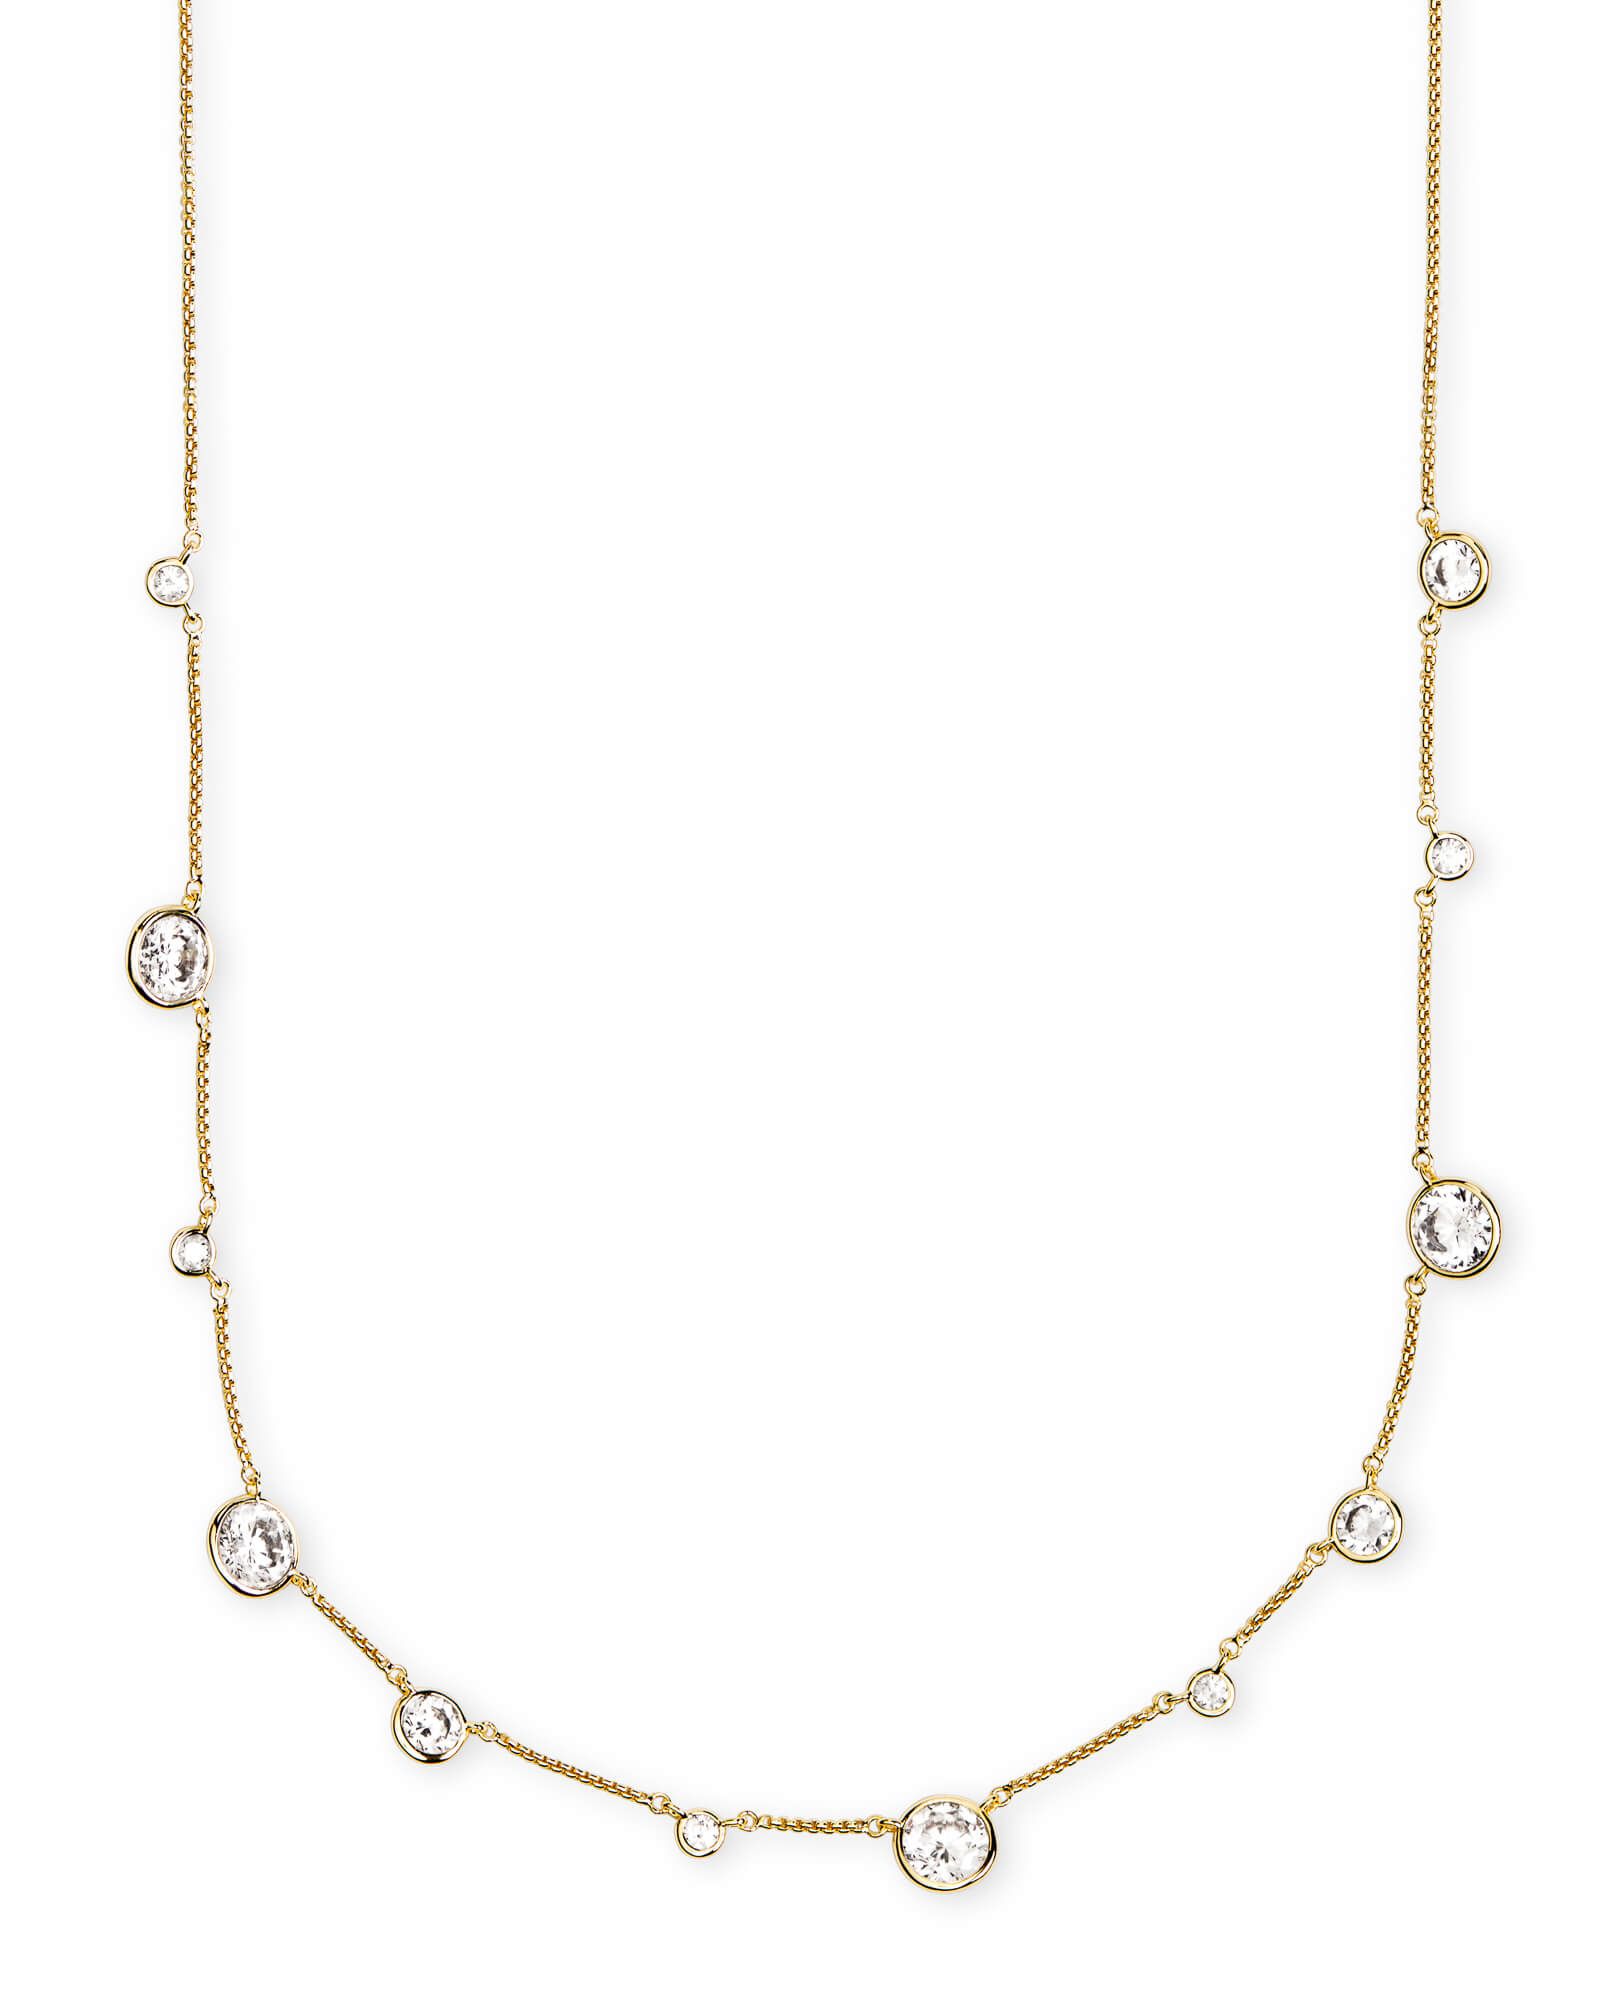 Clementine Choker Necklace in Gold | Kendra Scott